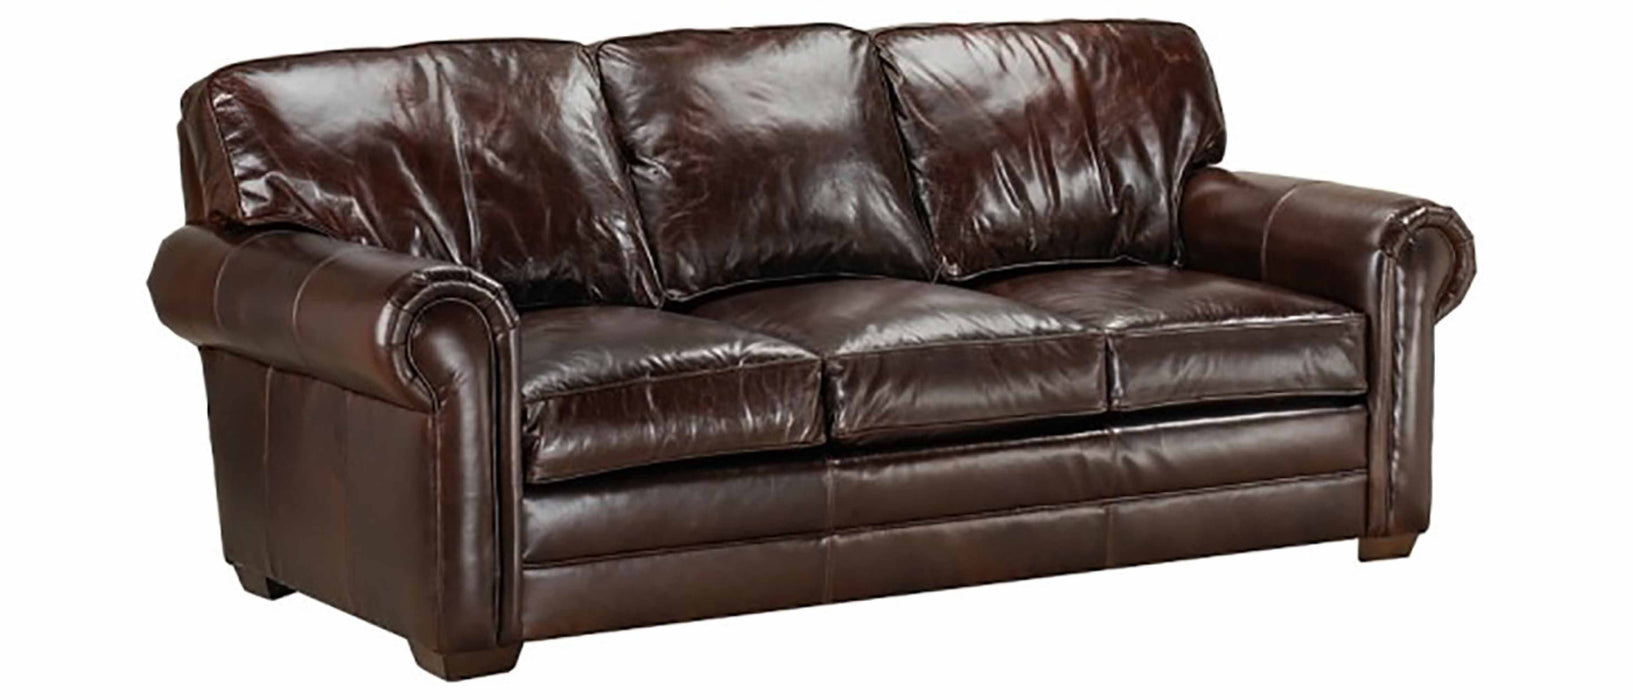 Kahne Leather Queen Size Sofa Sleeper | American Tradition | Wellington's Fine Leather Furniture